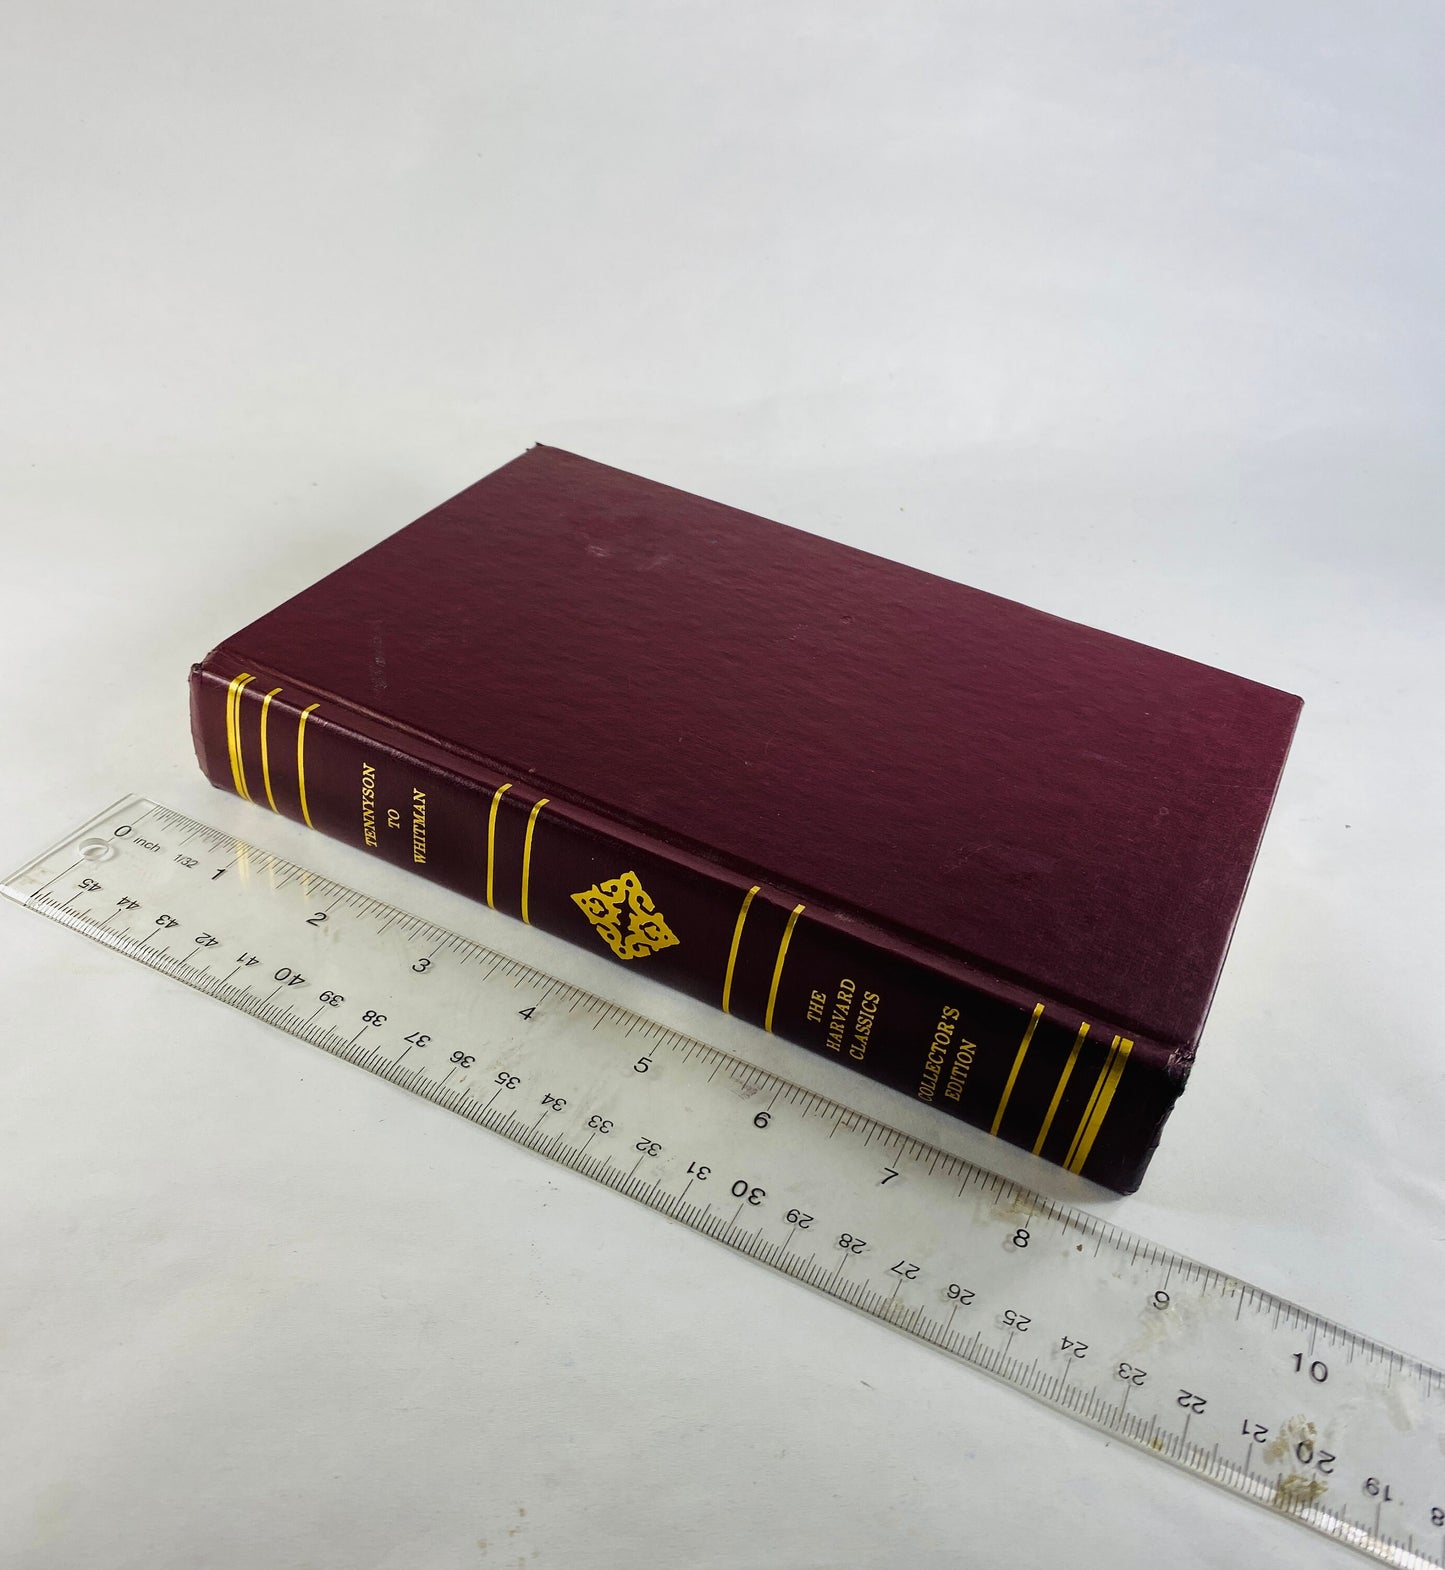 Tennyson to Whitman vintage Harvard Classics book philosophy maroon red with 22kt gold gilded lettering gift